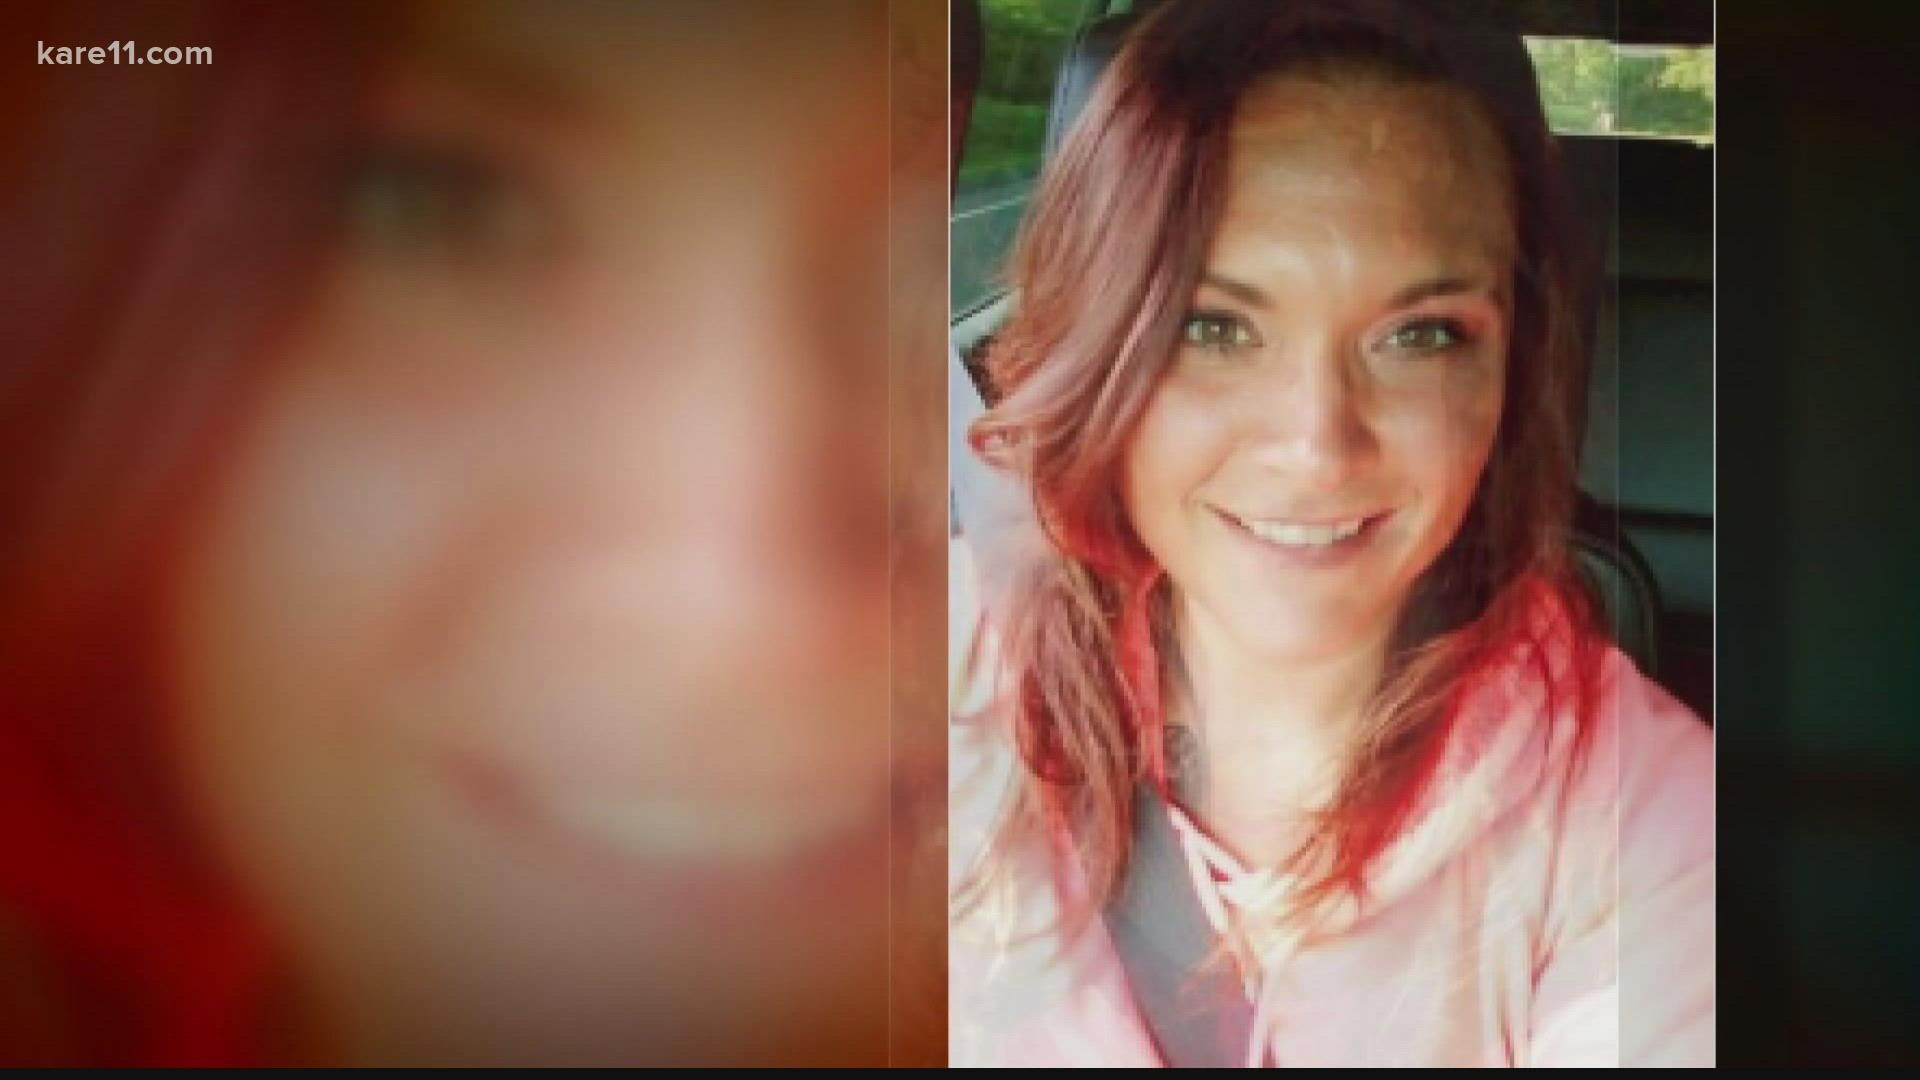 A private investigating group hired by the family said the remains of a person believed to be Ashley Miller, the 33-year-old mother of 4, were found in Hinckley.